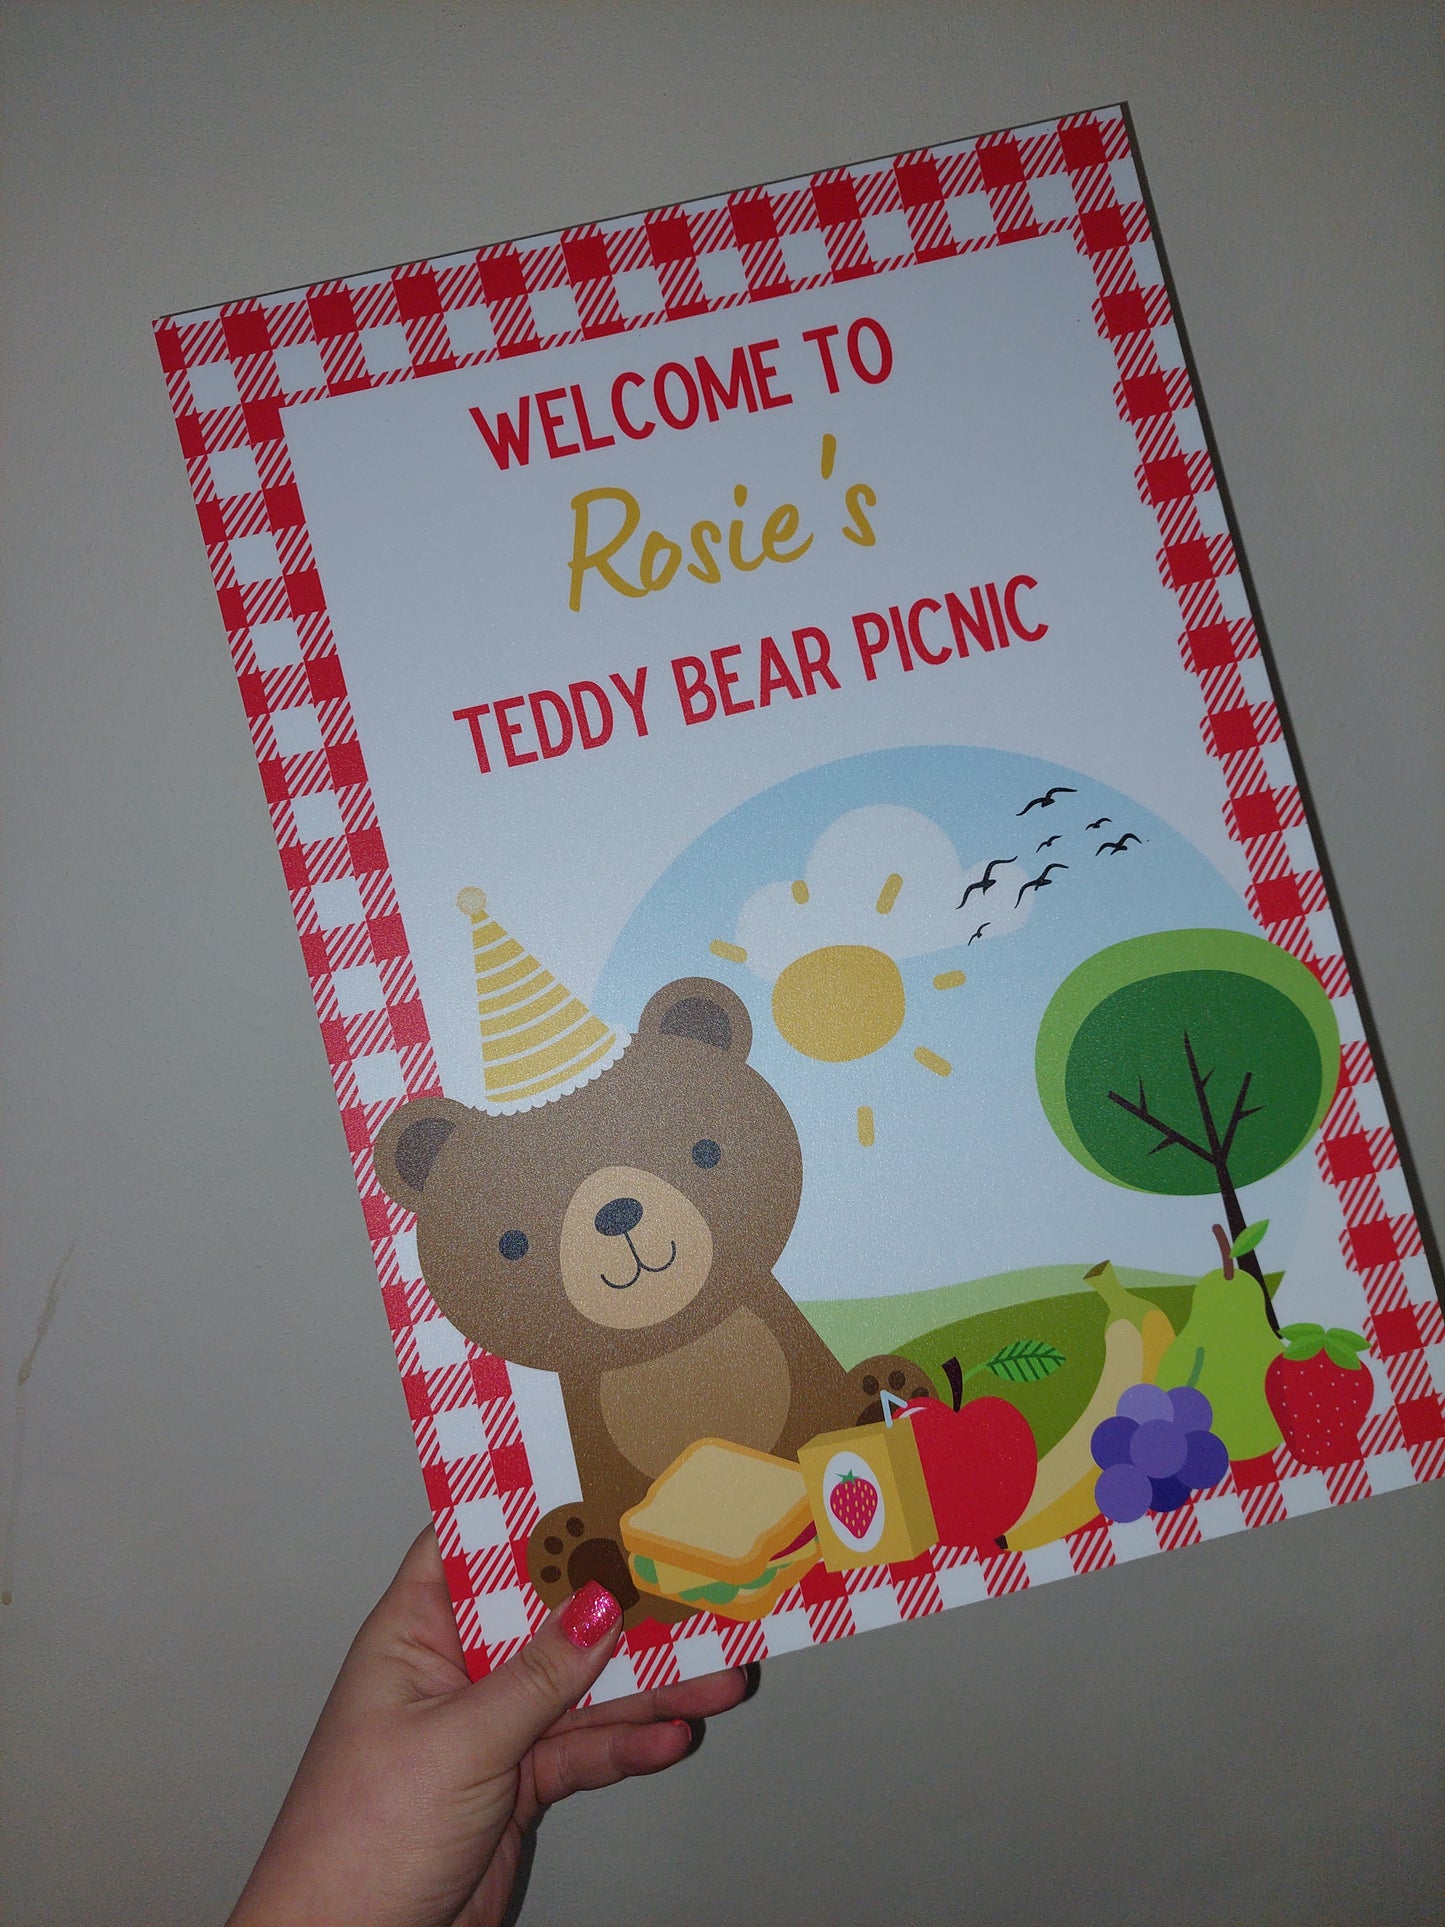 Red Teddy Bear Picnic Welcome Board Sign | Personalised Birthday Board | Birthday Party Sign | A4, A3, A2